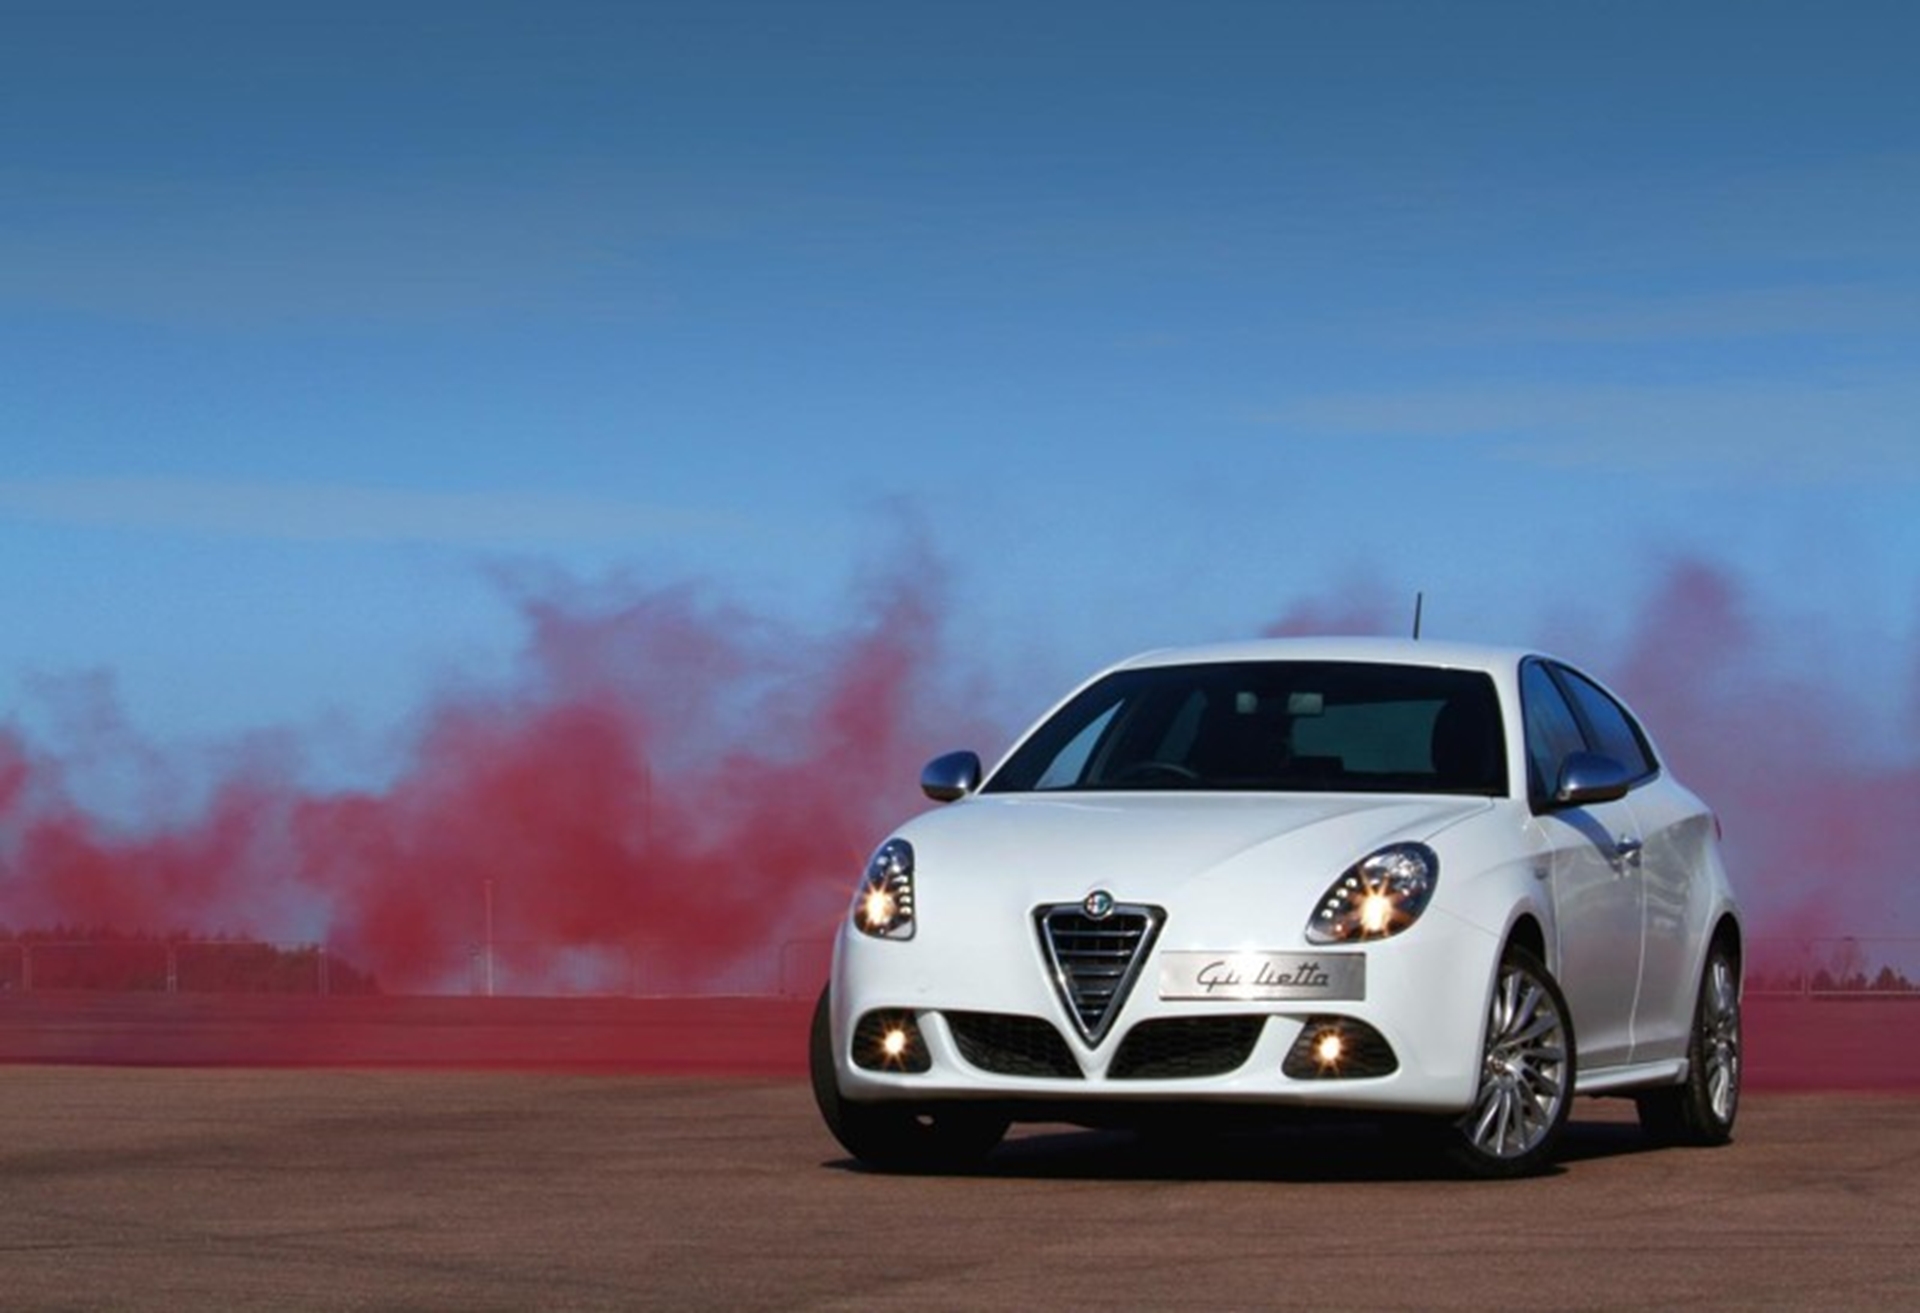 299 Reasons To Buy: Alfa Romeo Most Competitive Giulietta Offer Yet